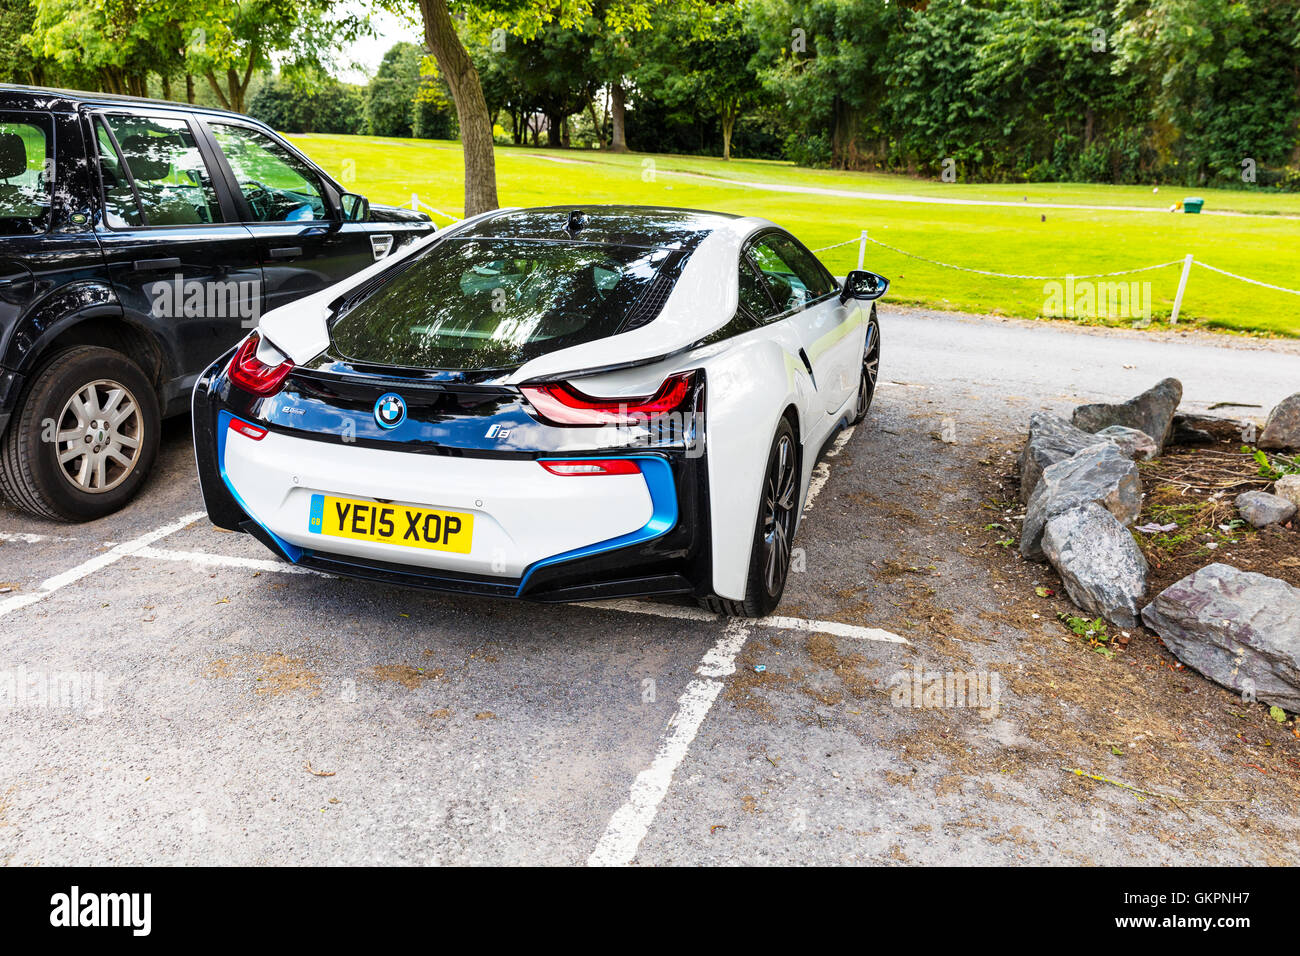 BMW i8 sports car plug-in hybrid sports cars developed by BMW vehicle parked supercar electric fuel economy Concept Vision UK Stock Photo